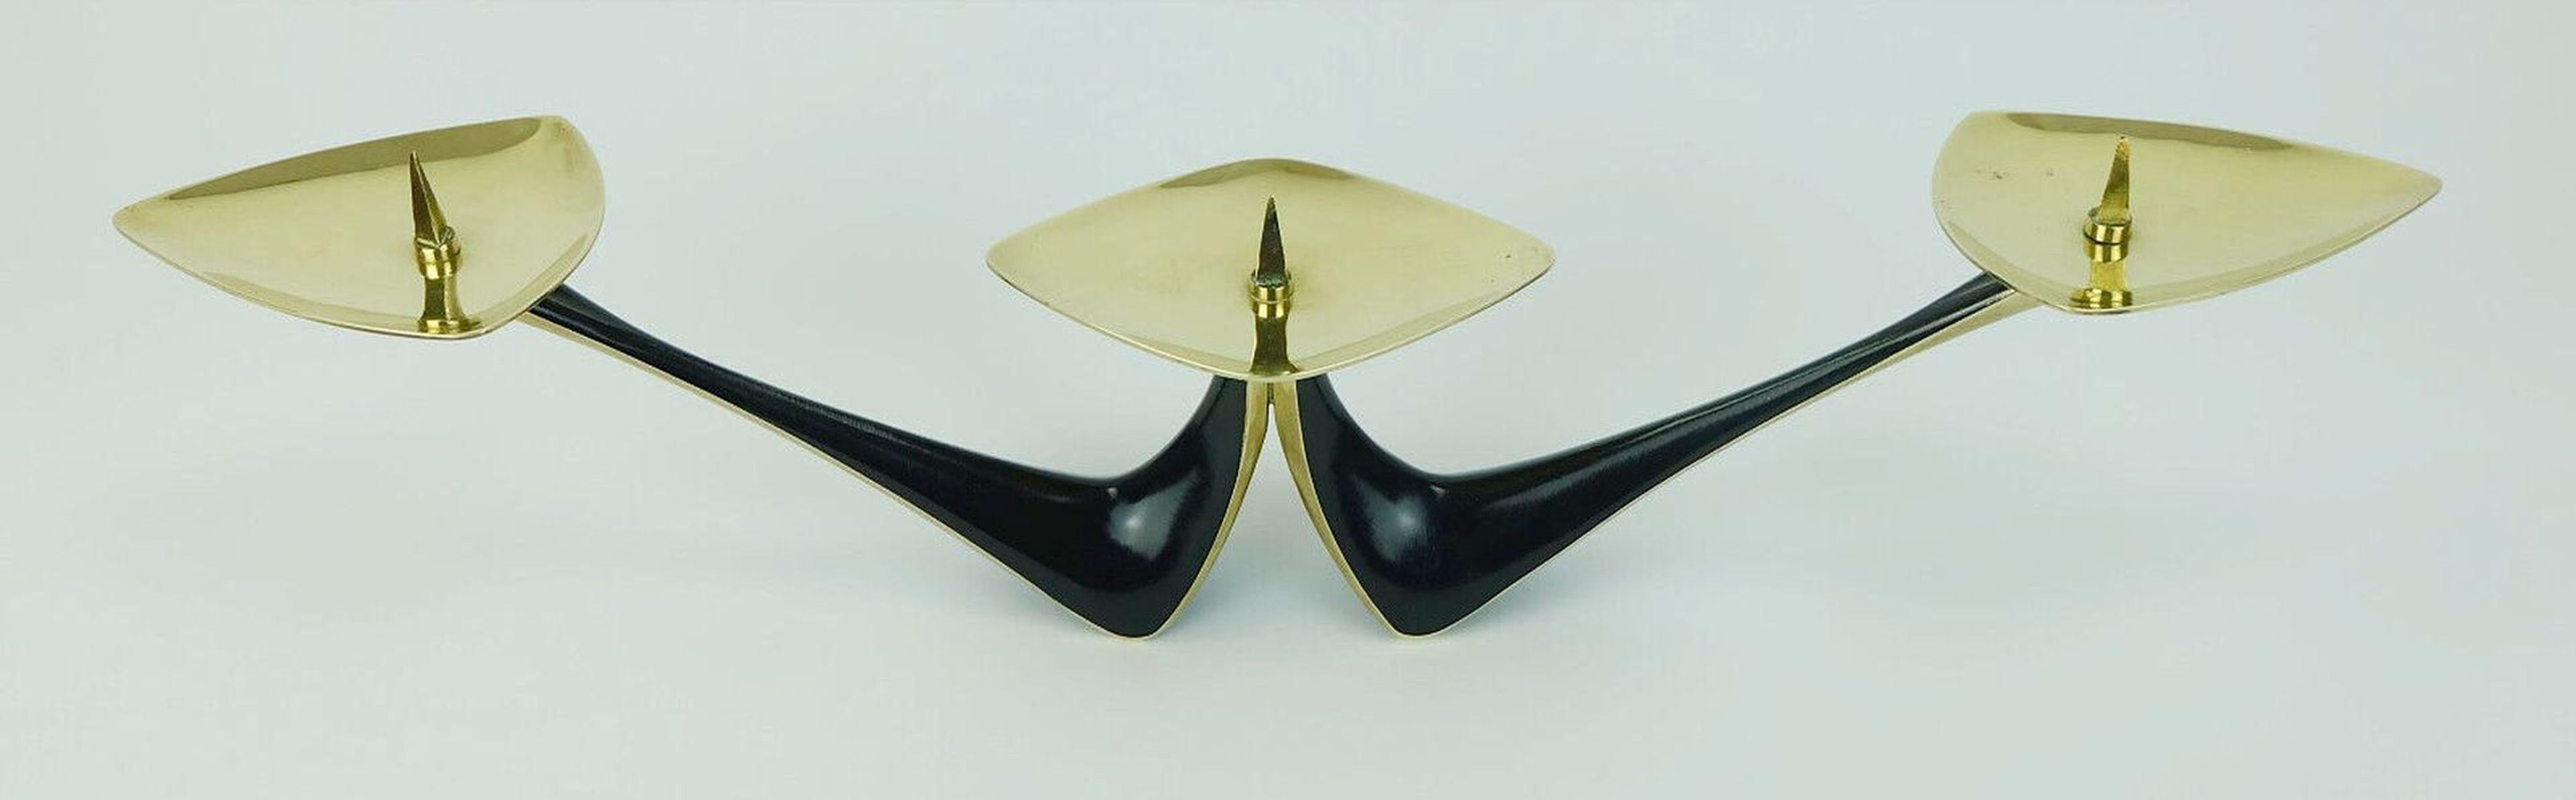 Mid-Century Modern 1950s Candle Holder Klaus Ullrich For Sale 4